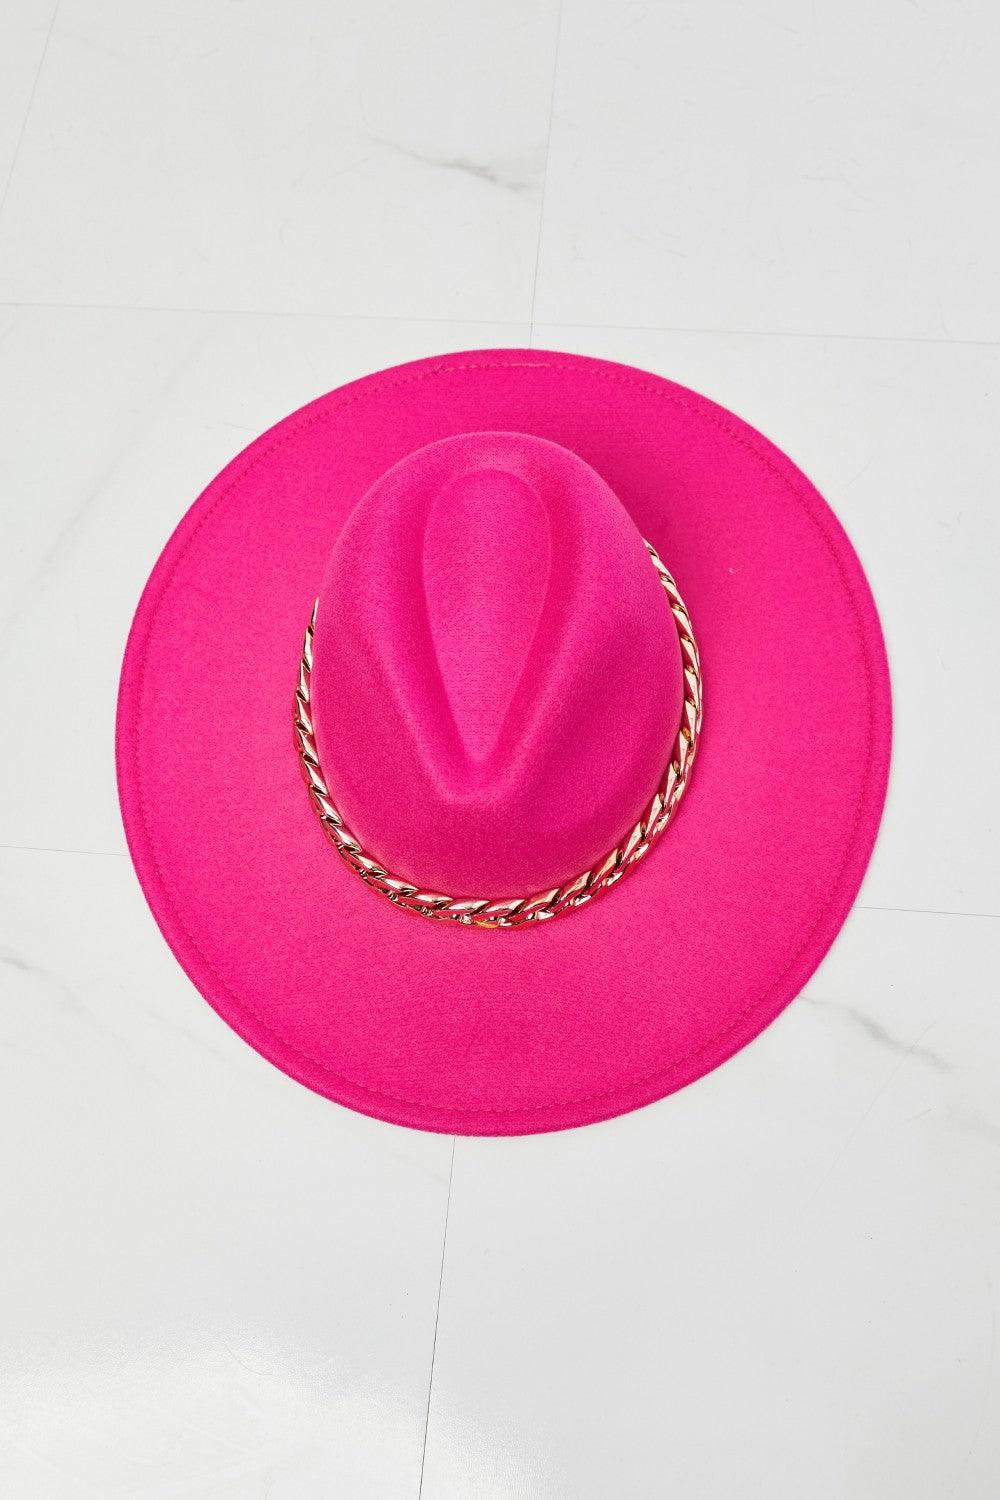 Fame Keep Your Promise Fedora Hat in Pink Hats